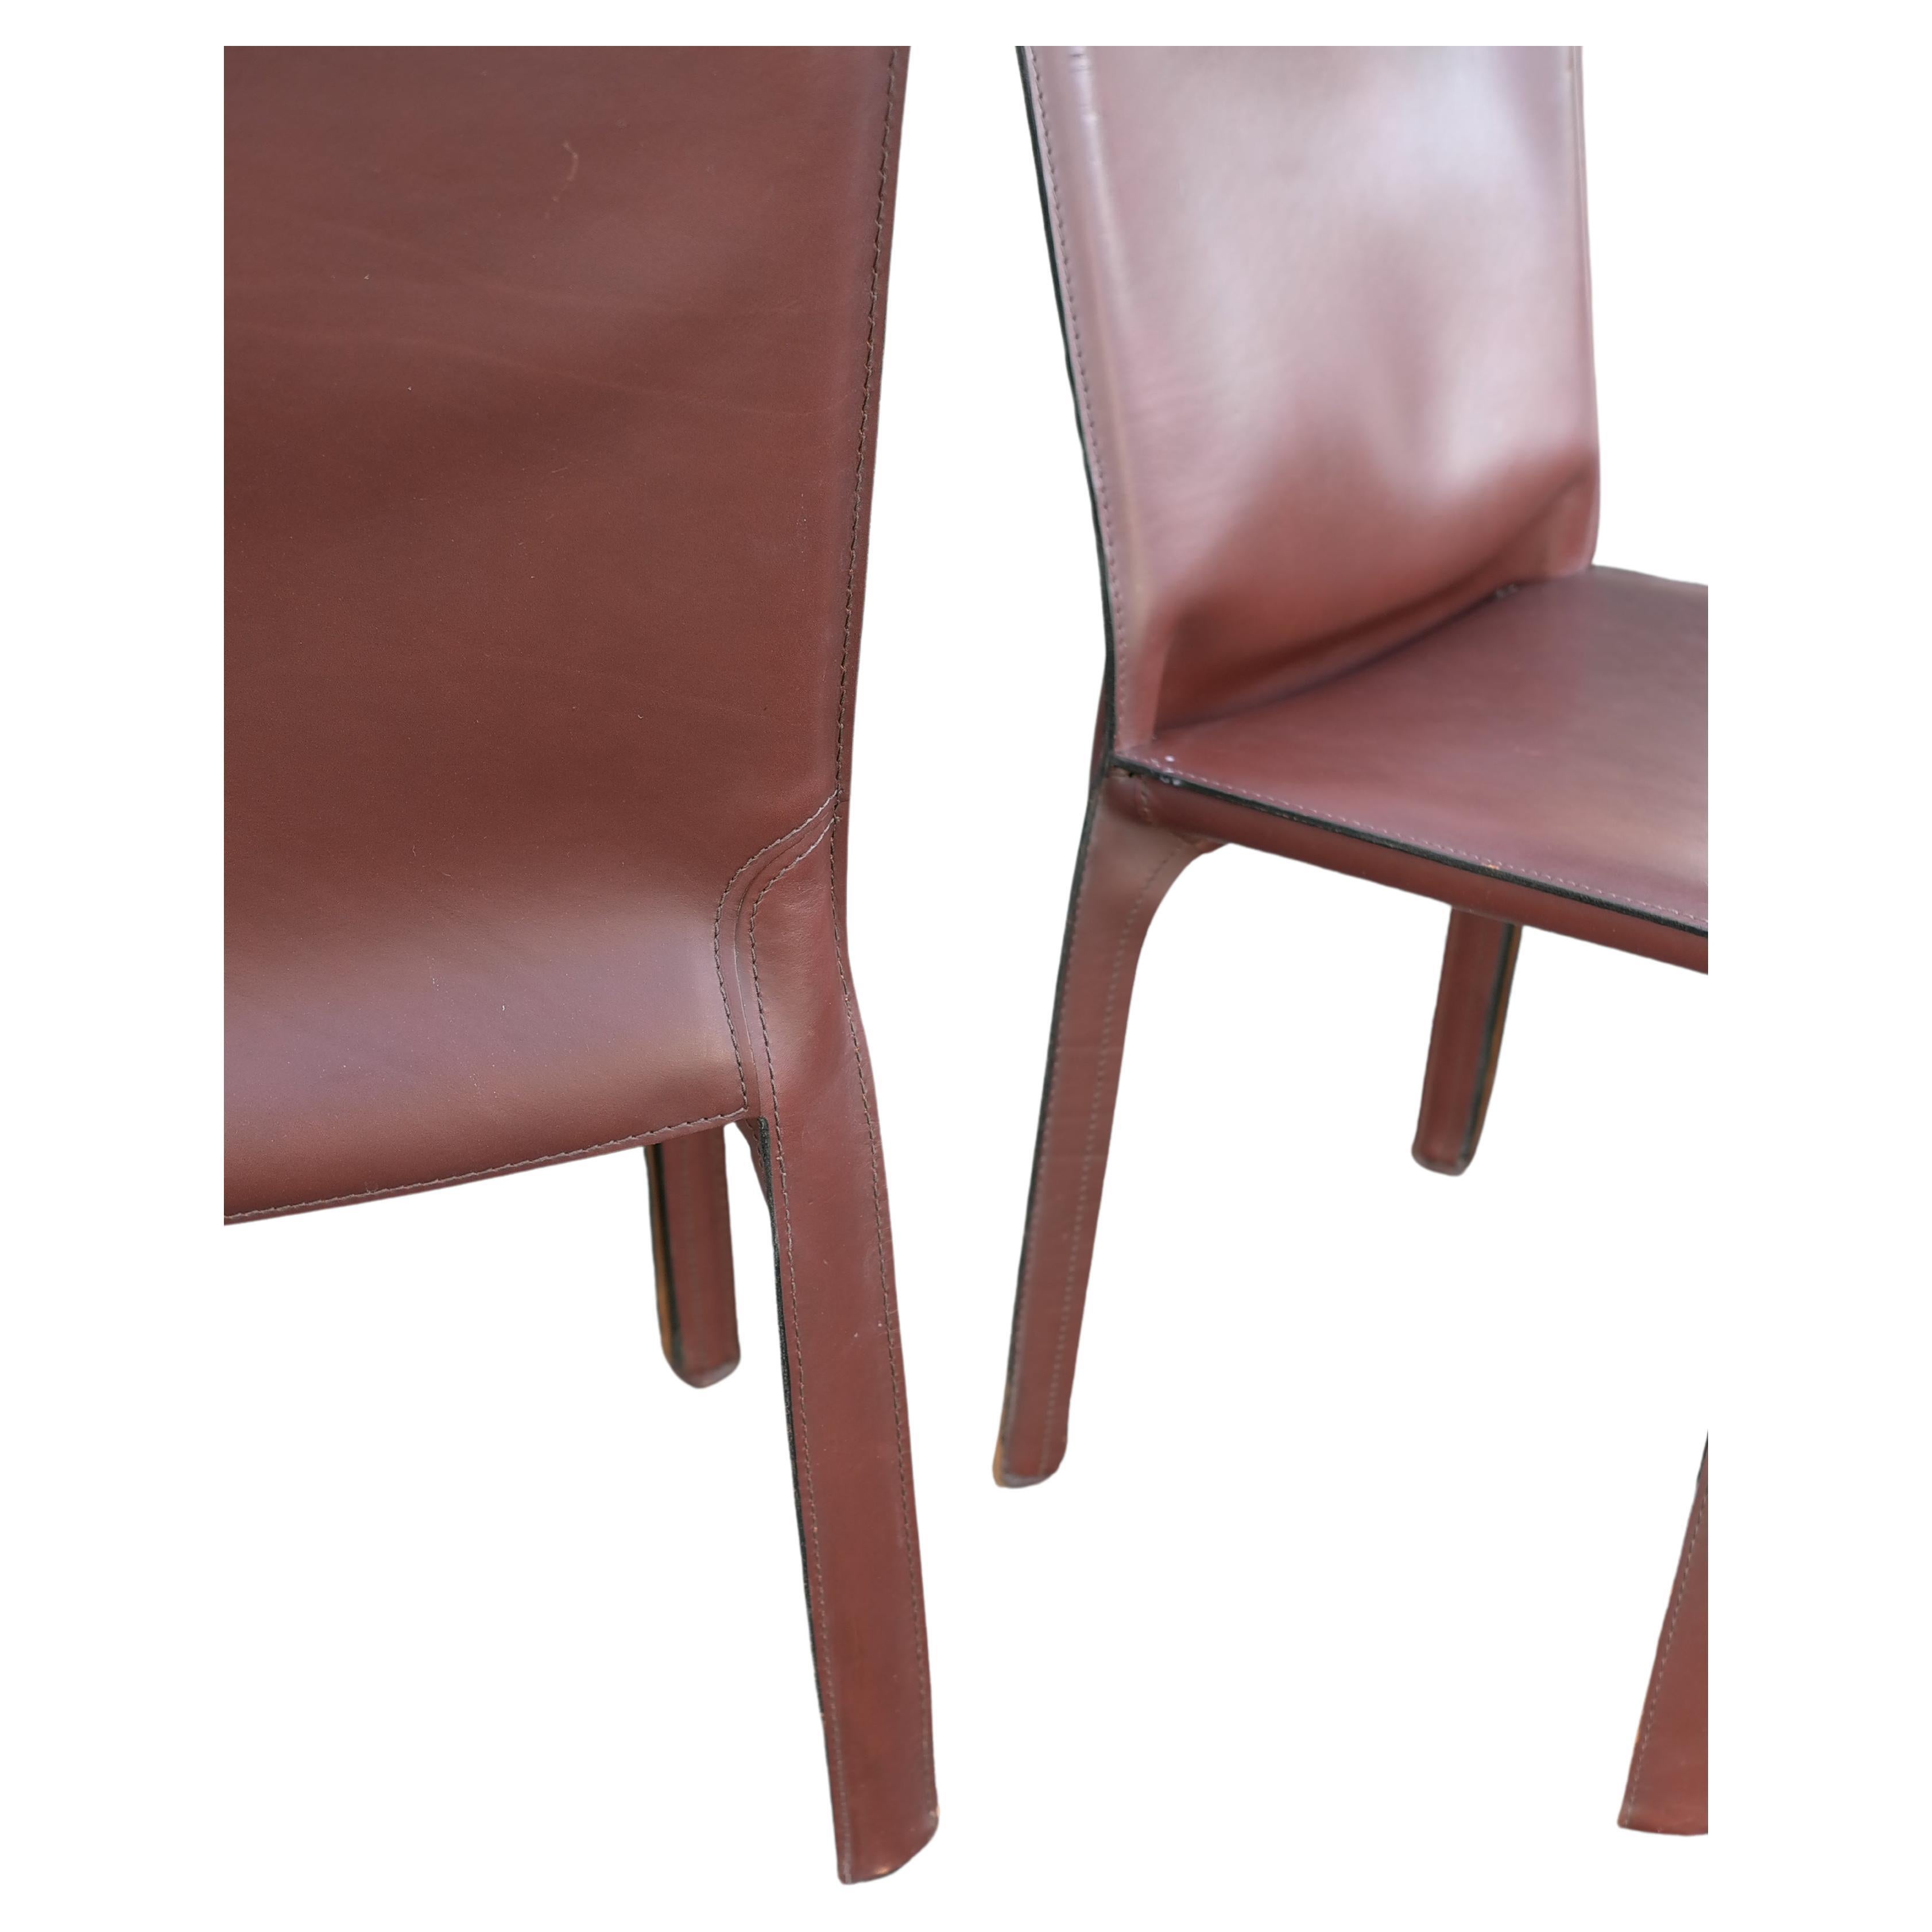 Pair of cab chairs by Mario Bellini for Cassina in chestnut color, Italy, circa 1970s. Wonderful original patina and wear. Broken in like your favorite baseball glove. Signed underneath with Cassina impressed mark on the leather and again on the